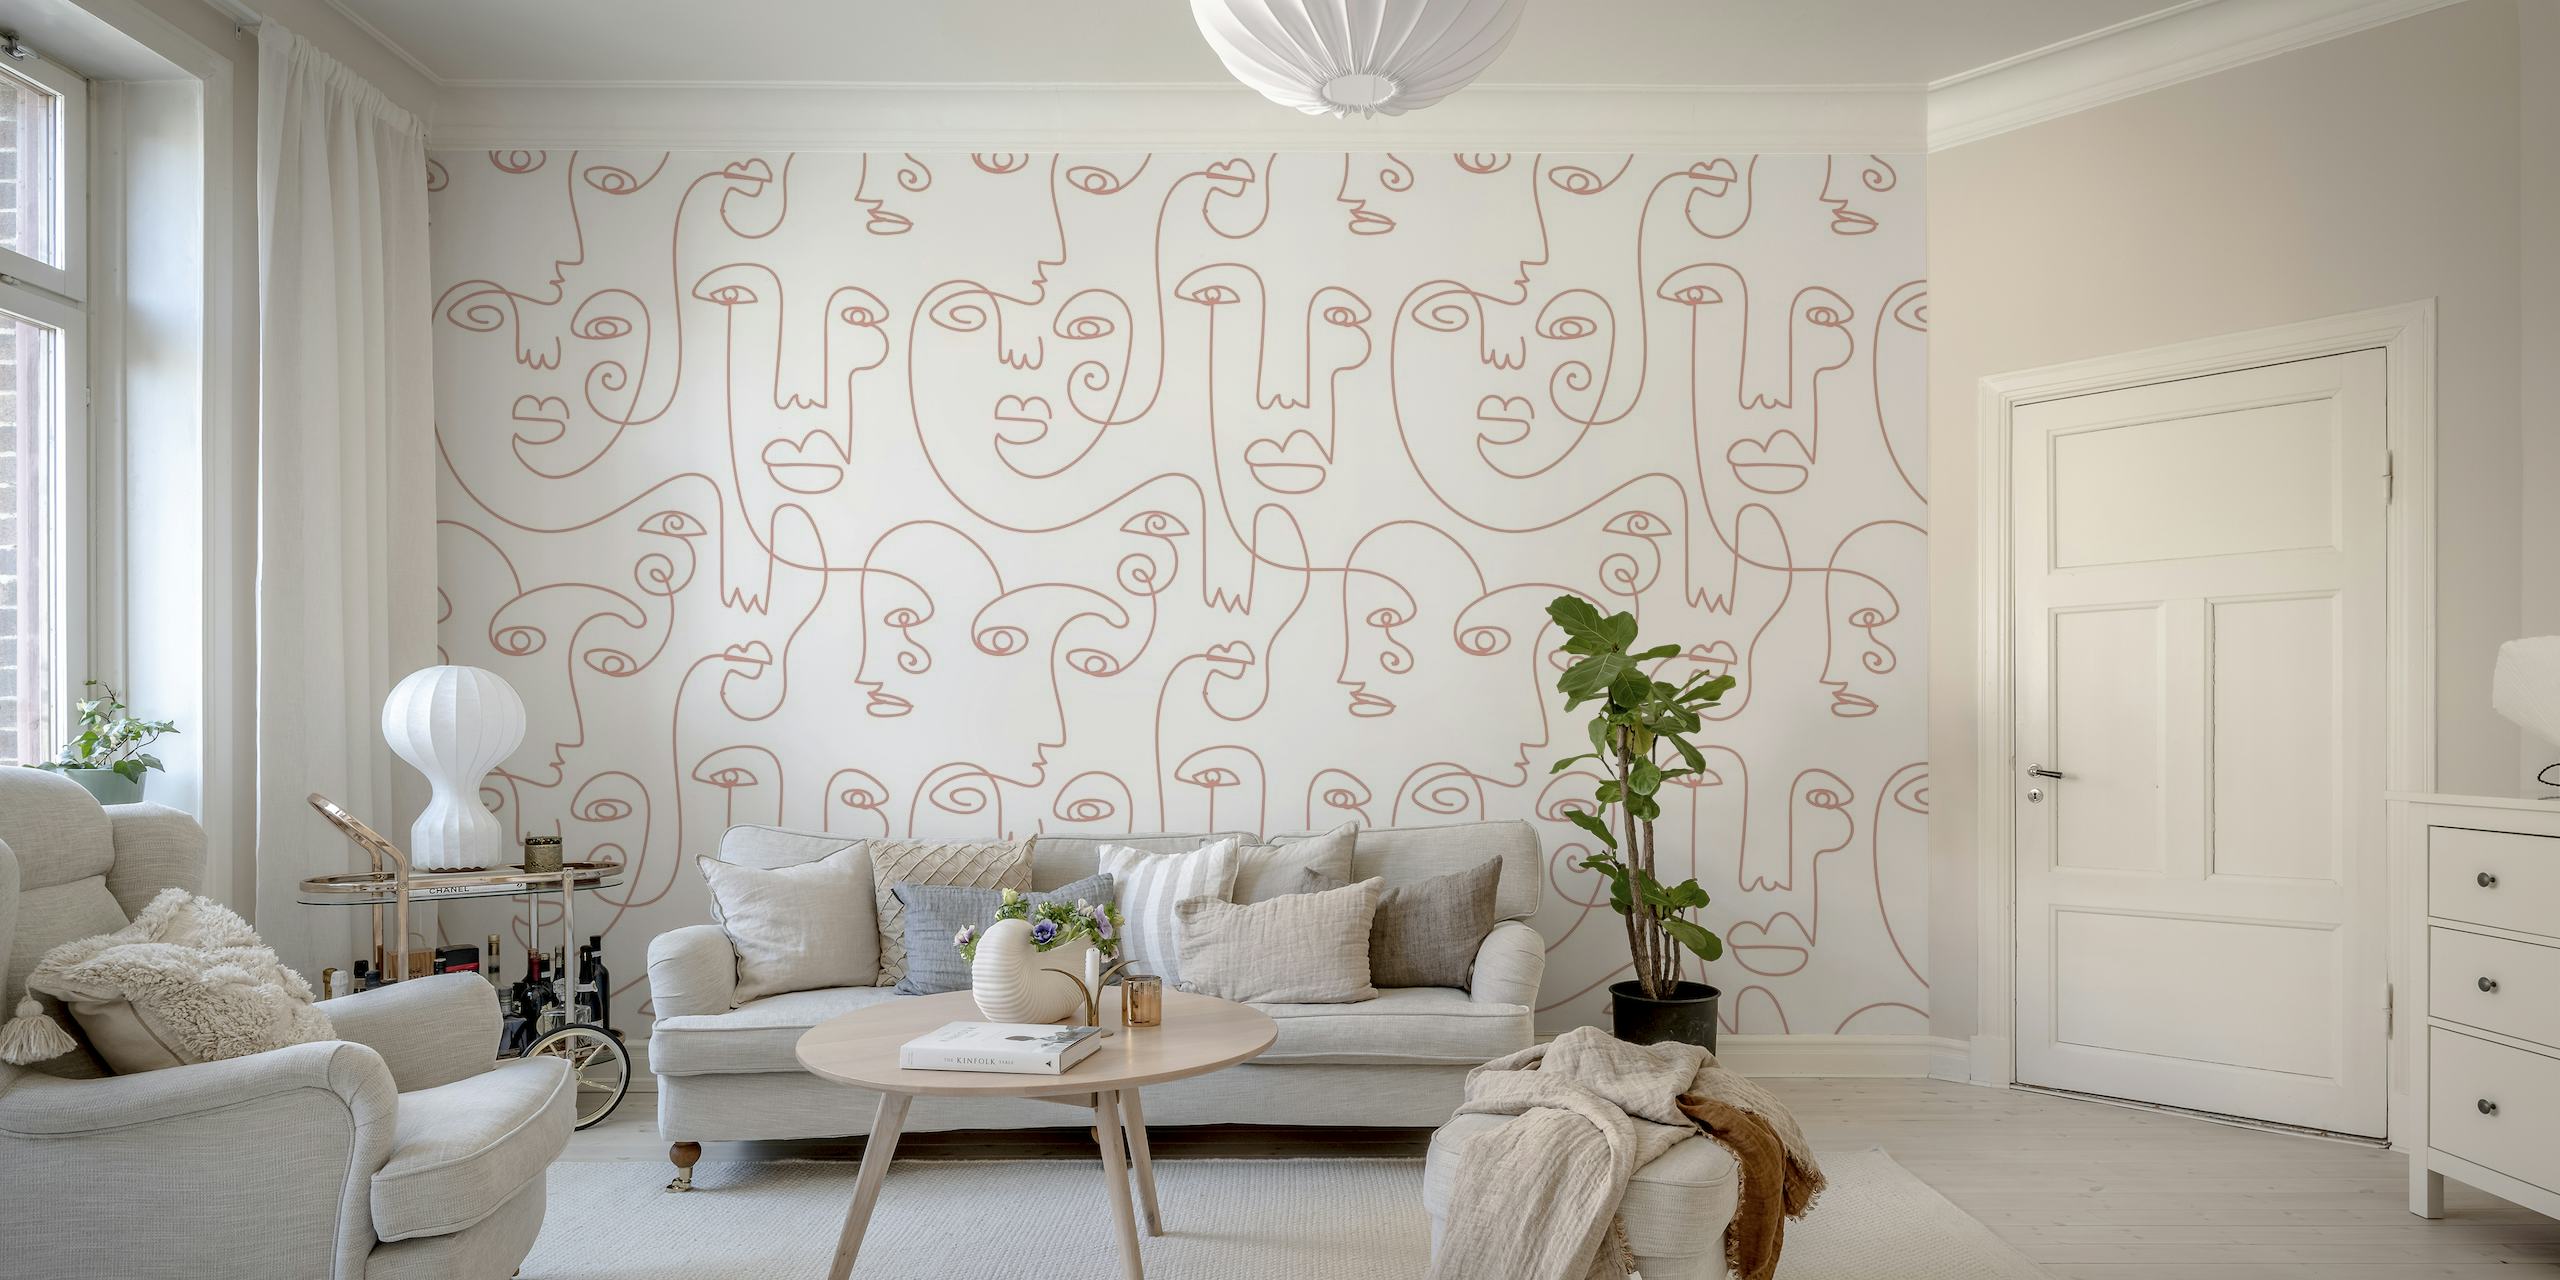 Picasso Inspired Art Nude wallpaper